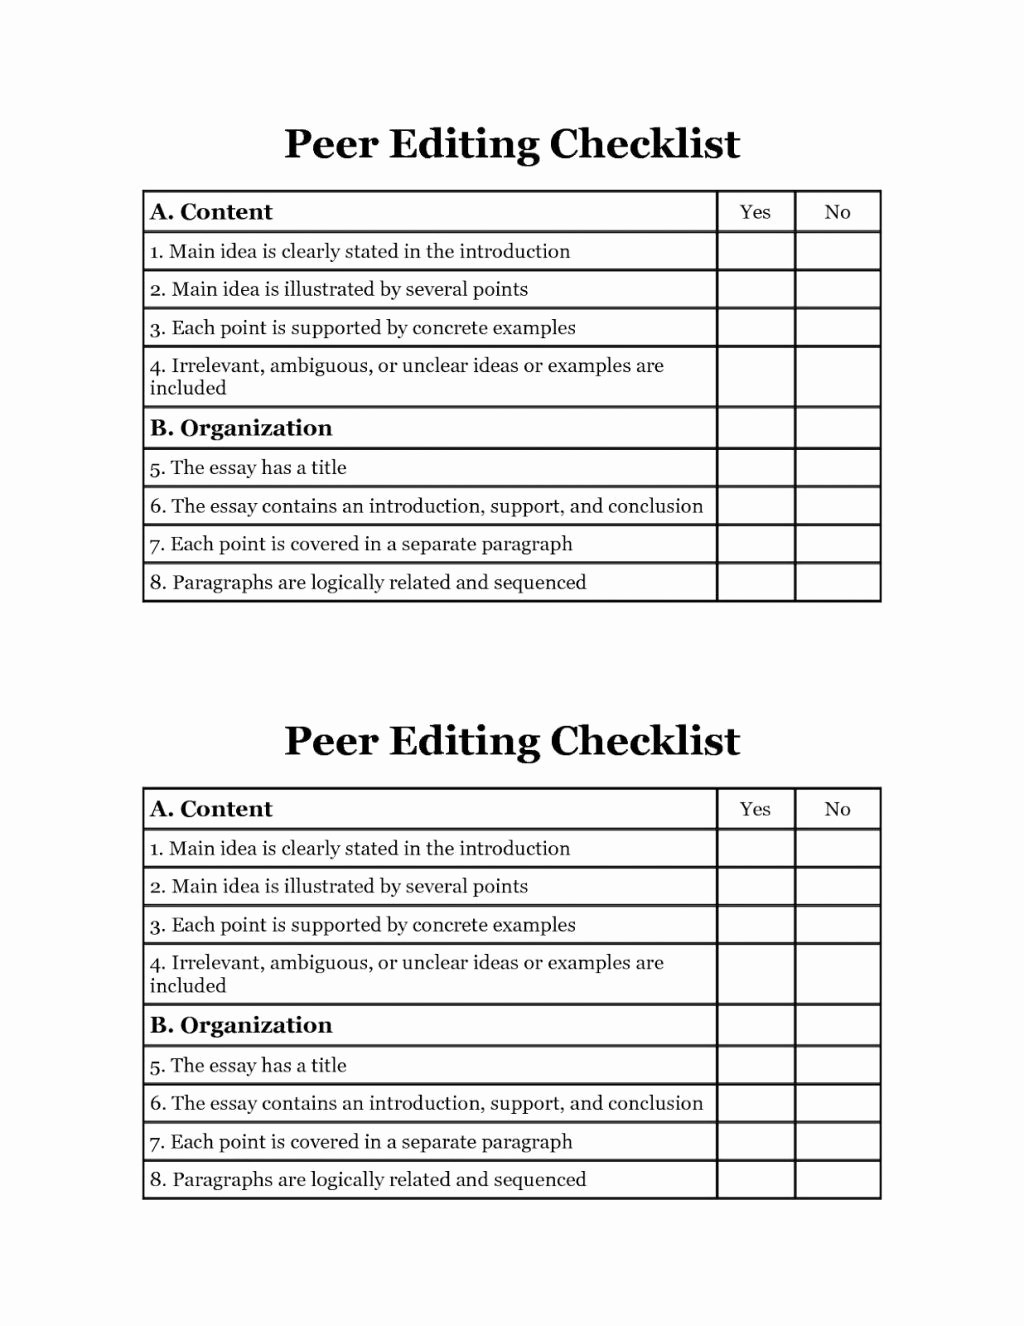 Paragraph Editing Worksheet Best Of 20 Paragraph Editing Worksheets High School